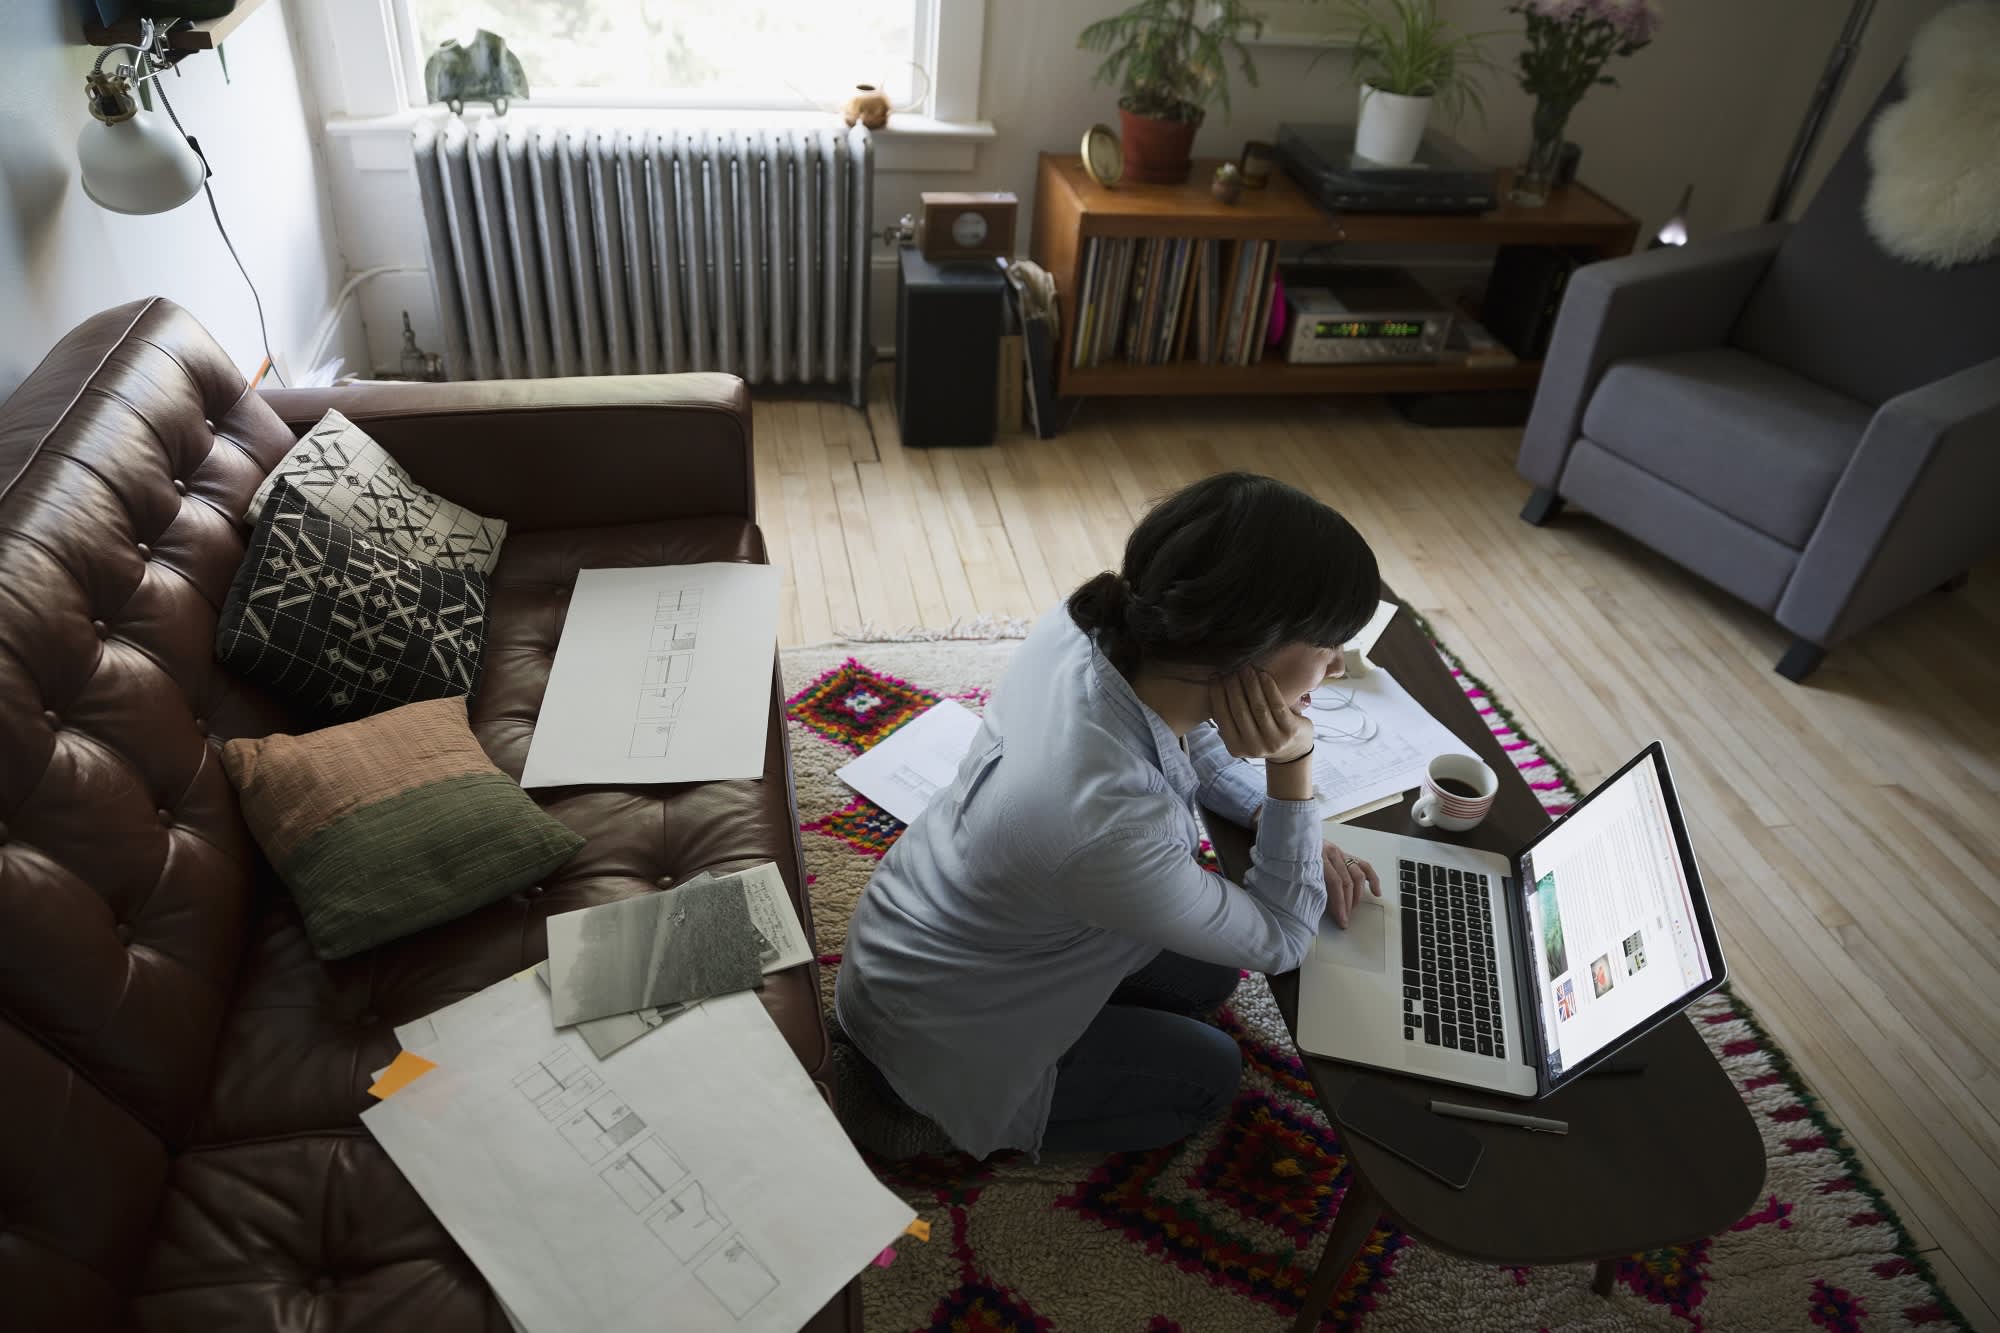 4 ways to be productive and avoid distractions when working from home